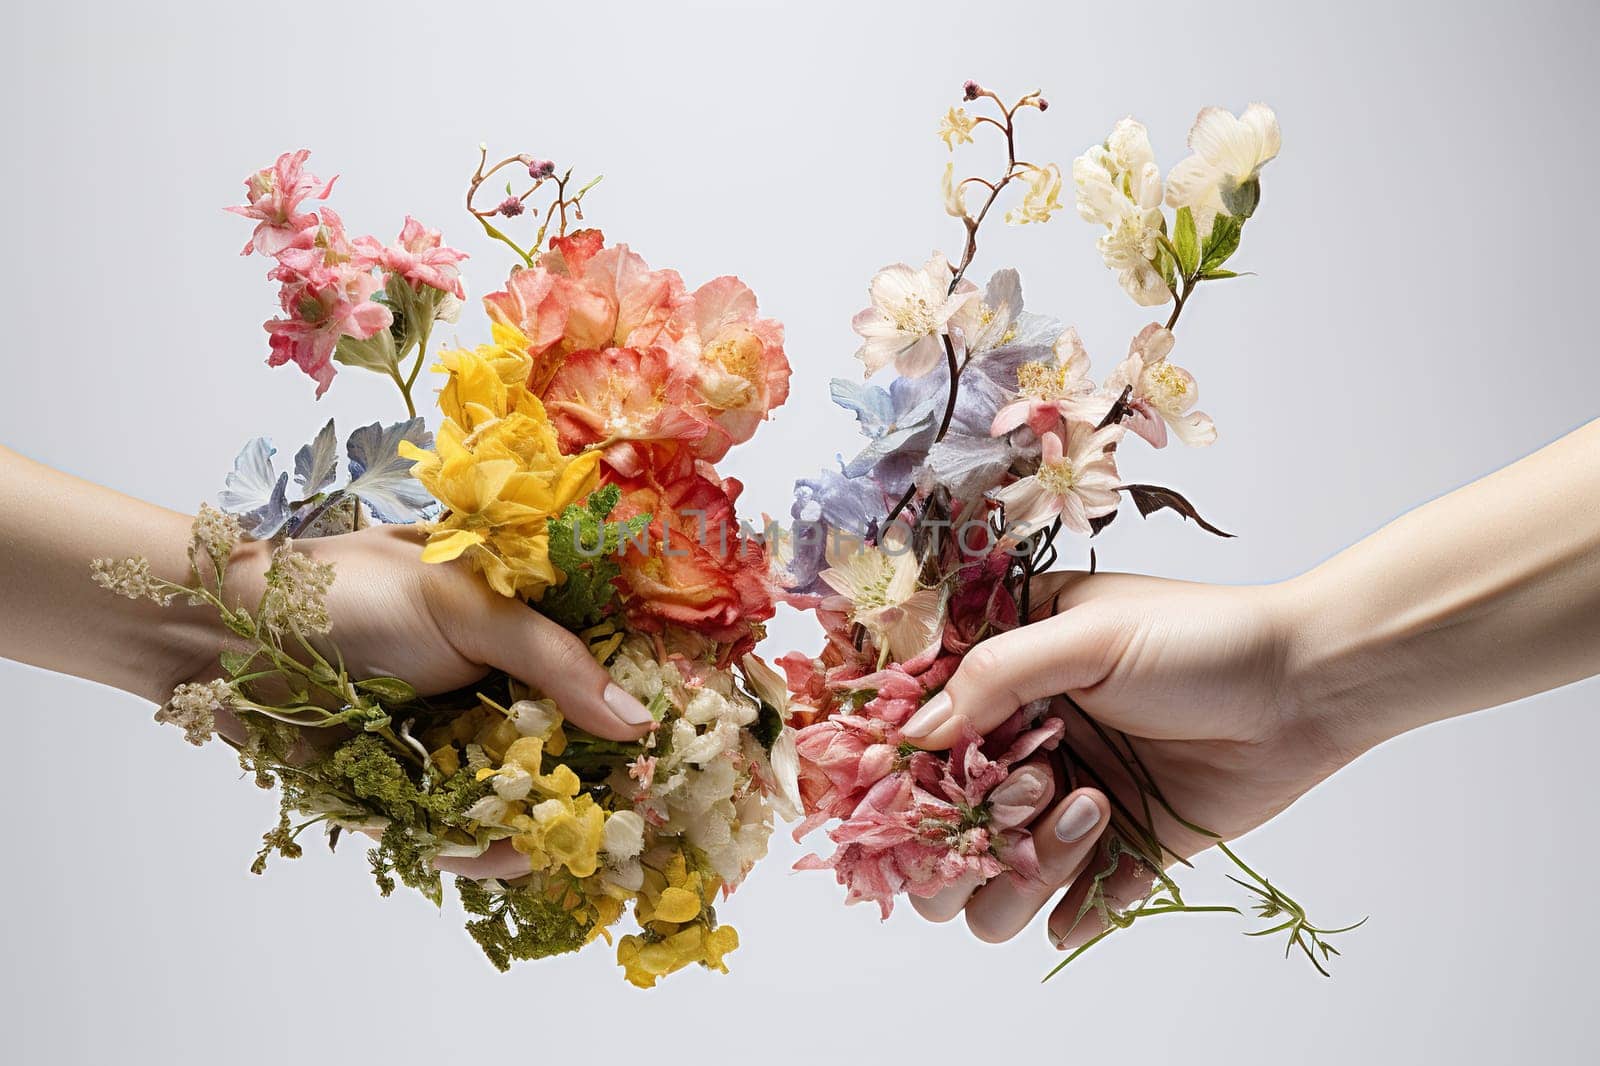 Two hands with flowers reach out to each other.